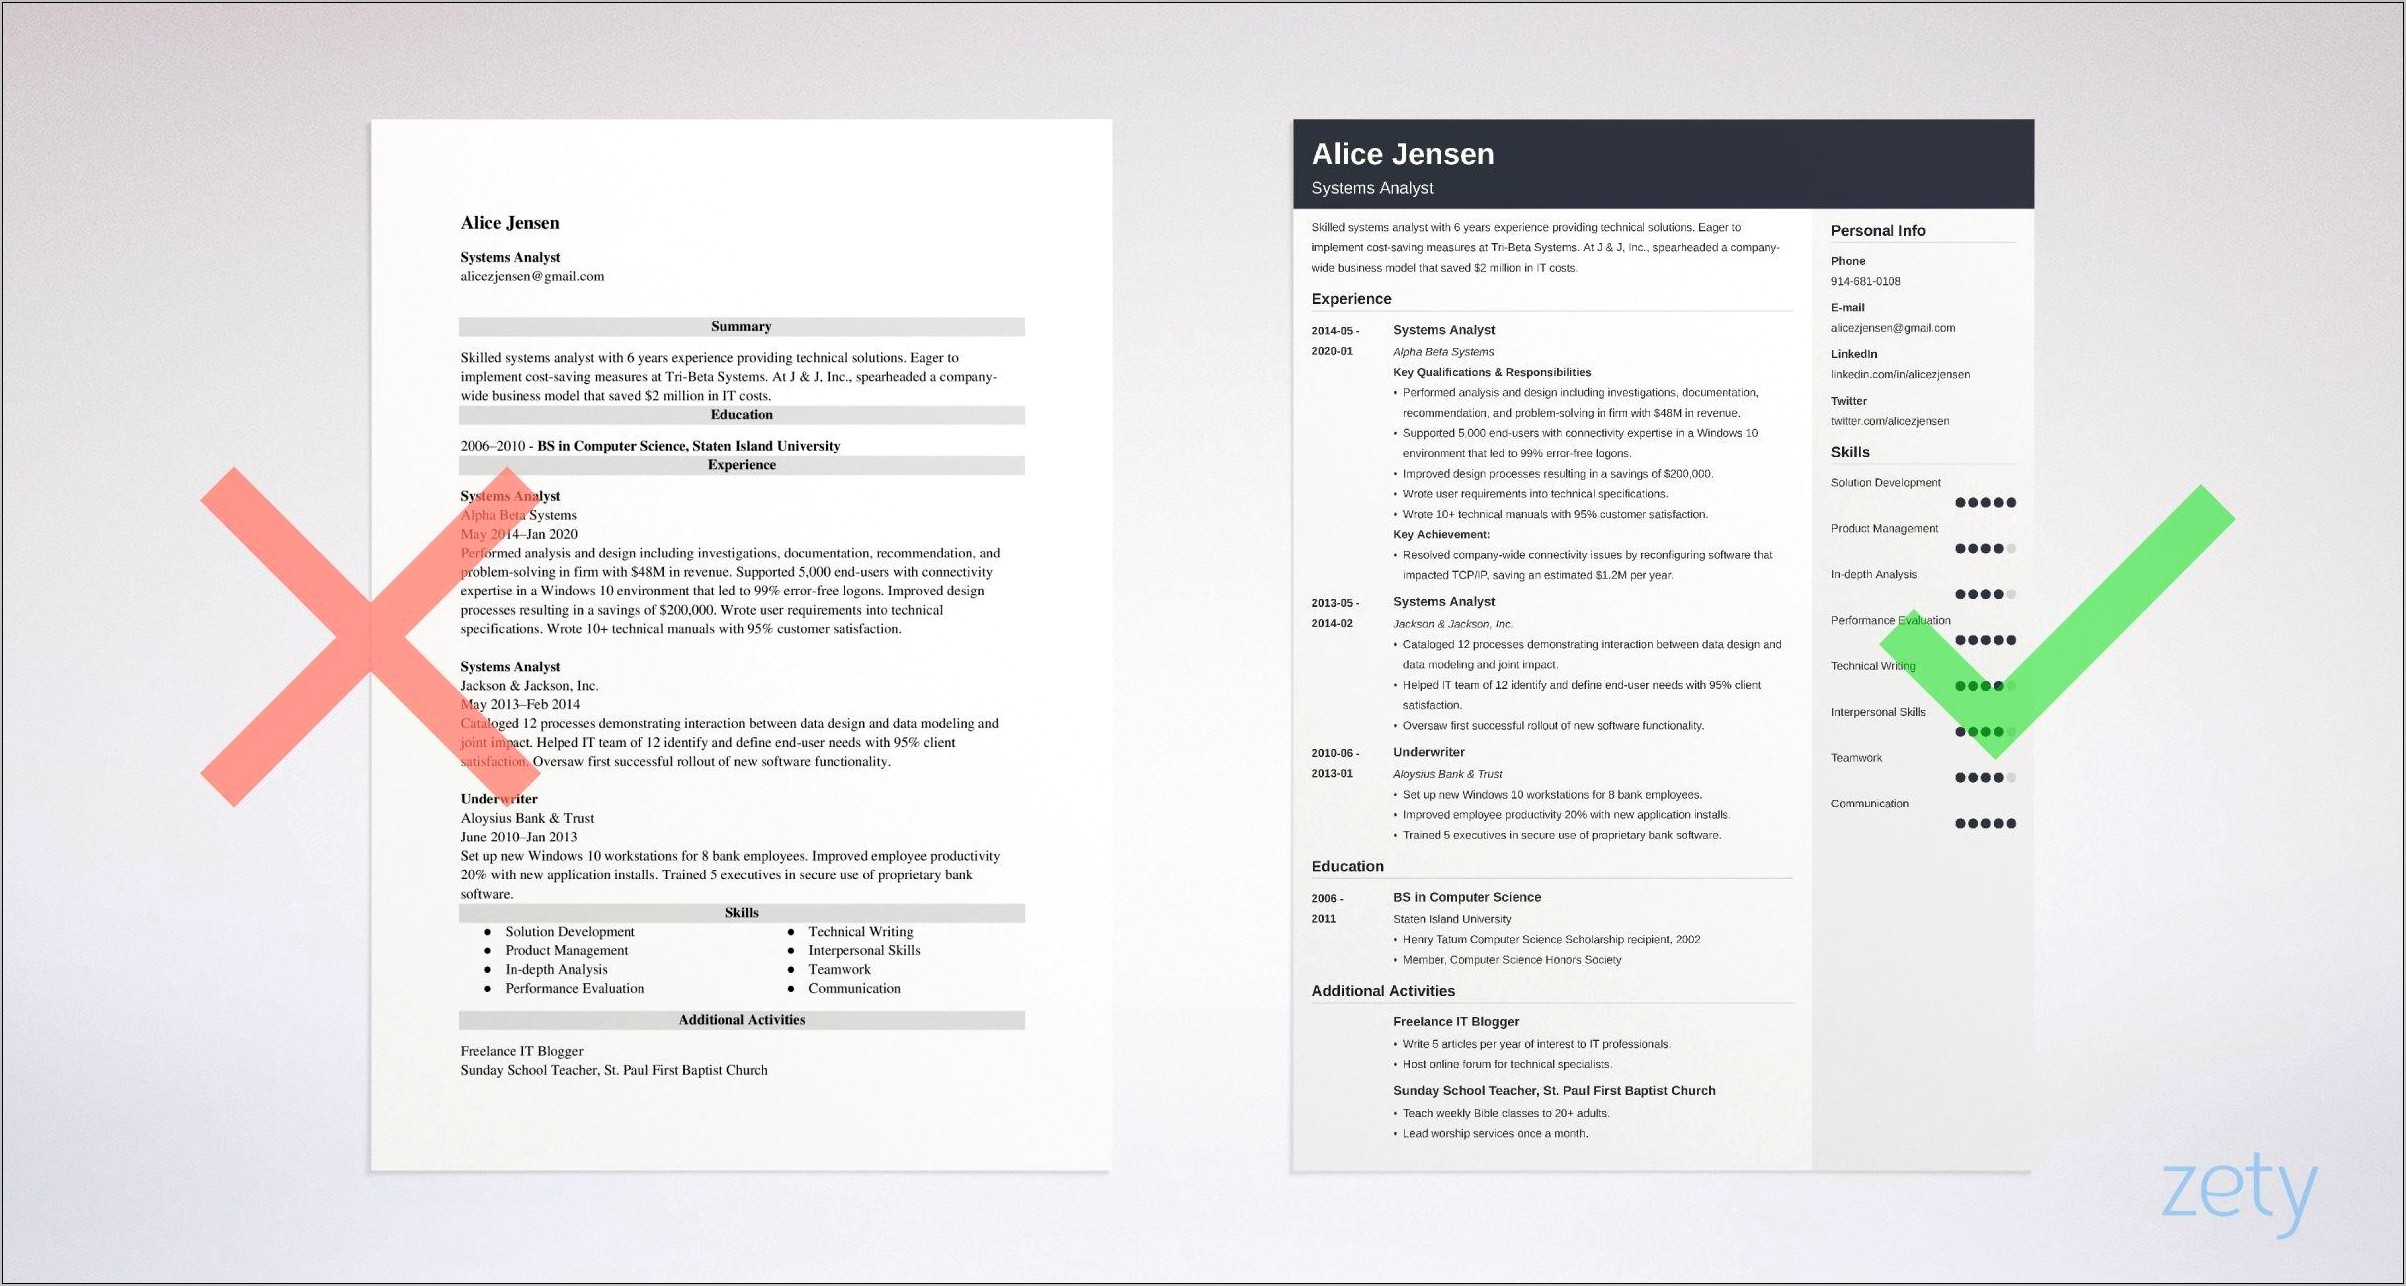 Resume Examples For Application Analyst